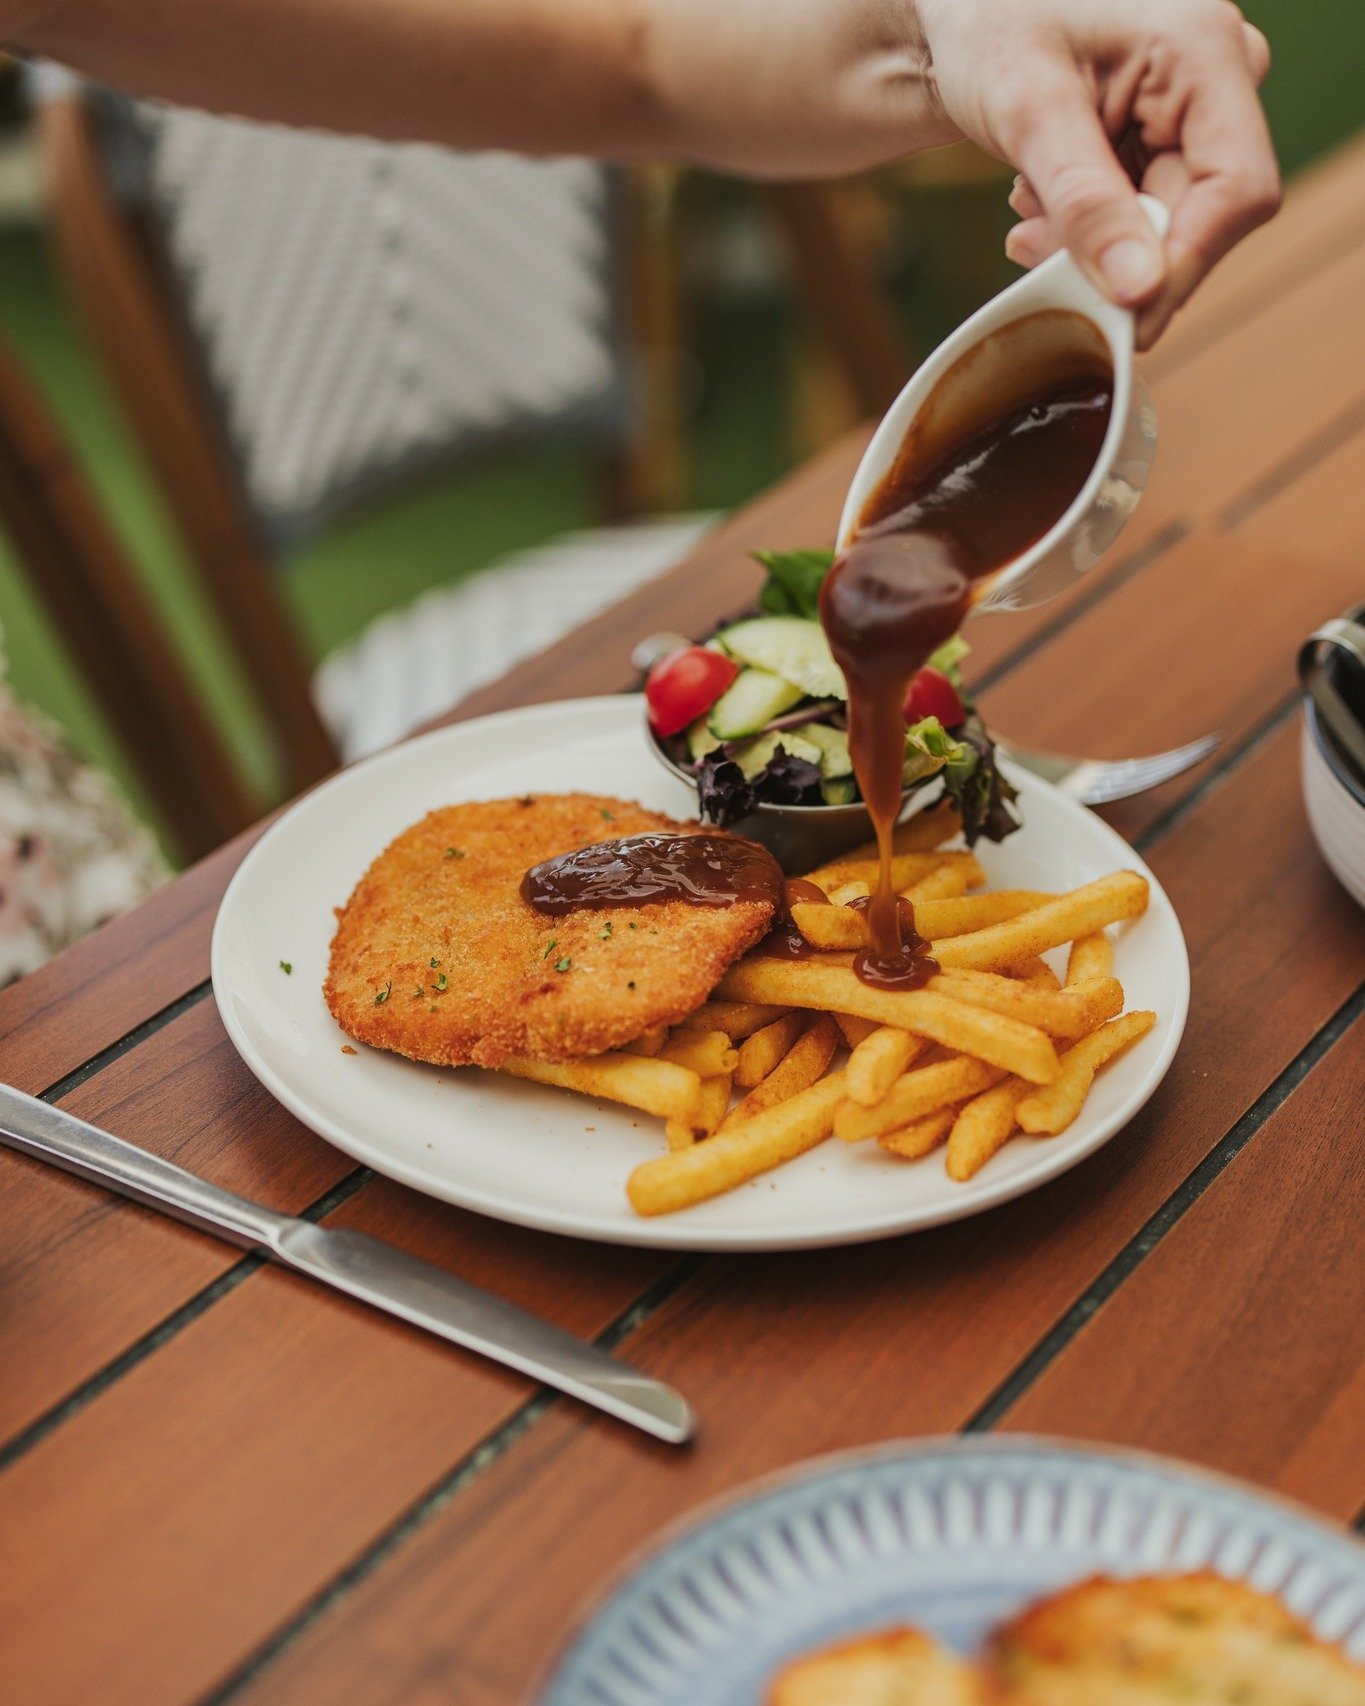 Schnitzel Night is tomorrow night! 🥳

Join us every Tuesday for a golden schnitty 😋 whether you like chicken or beef, we've got you covered! 

Book here 👉 www.thebartley.com.au